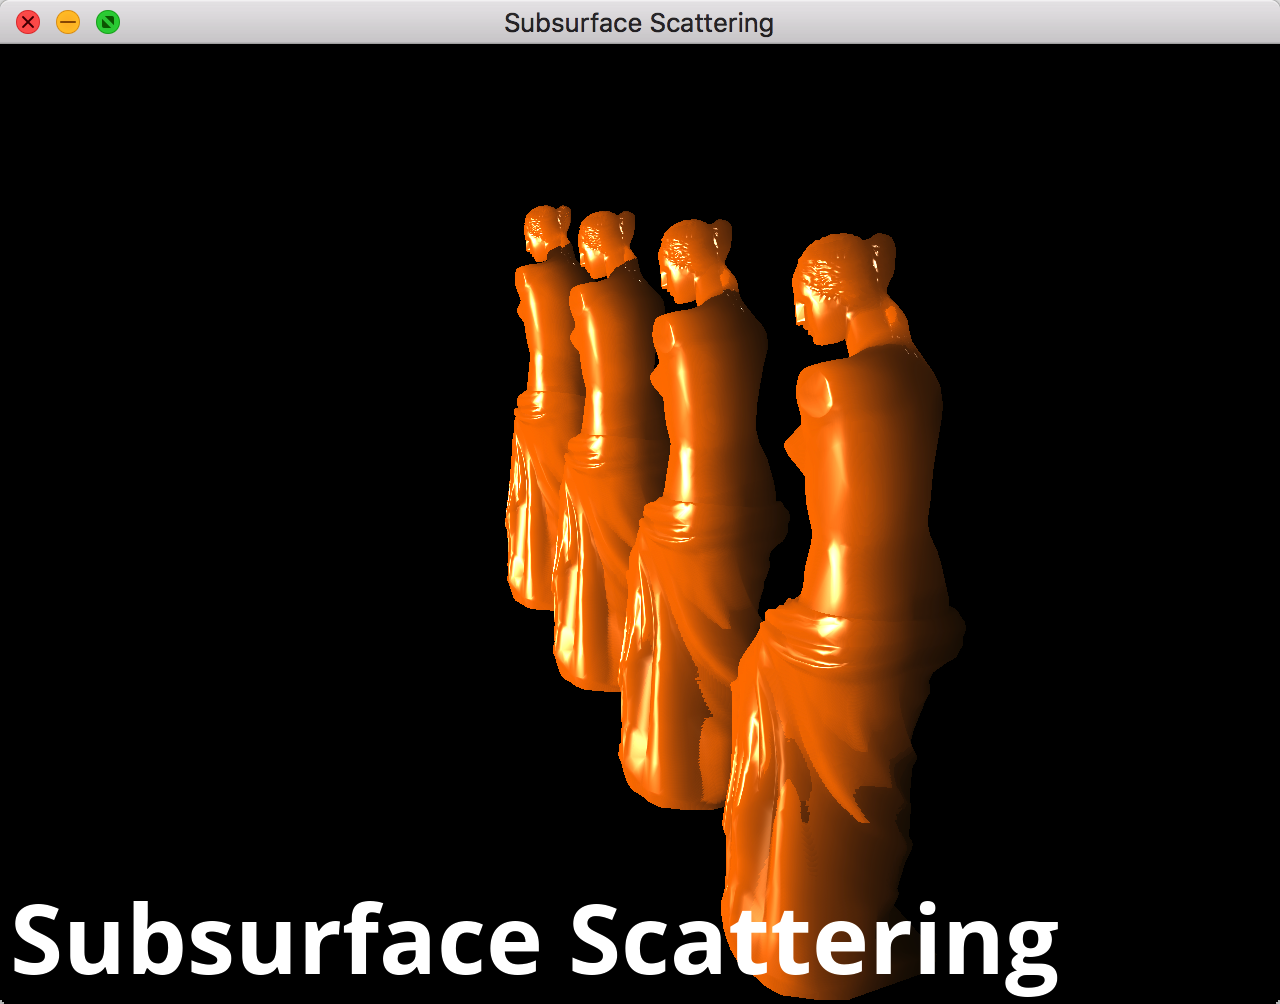 Subsurface Scattering 3